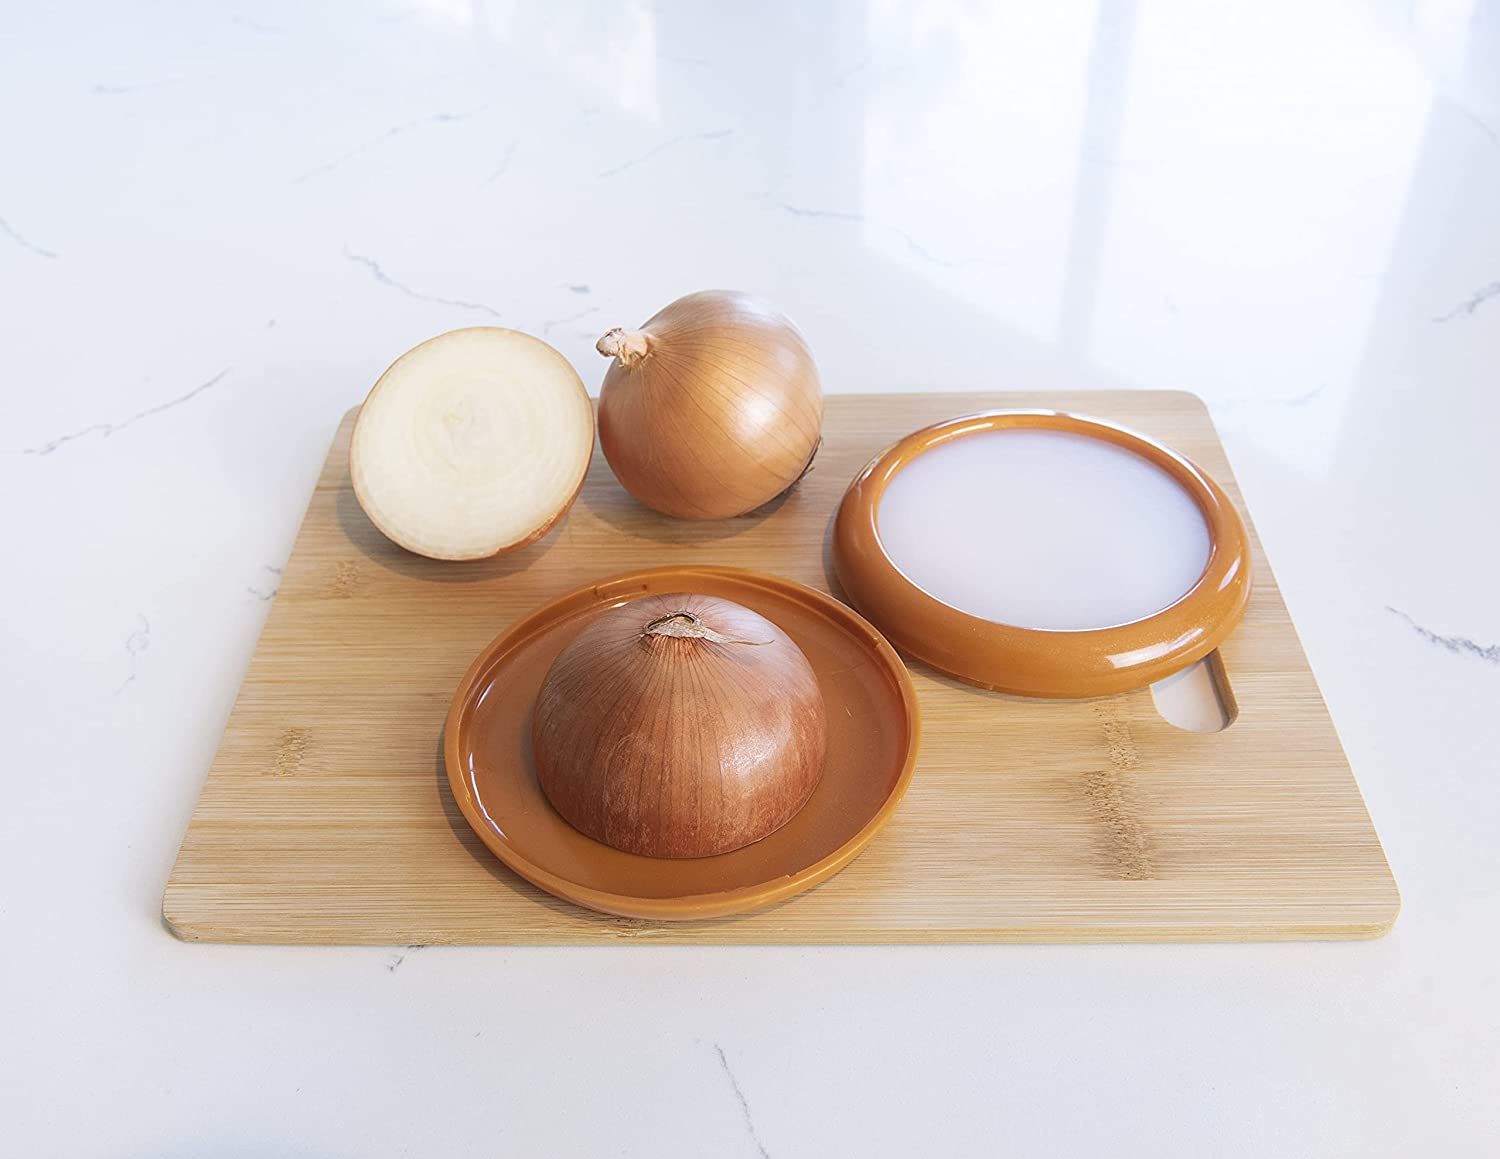 An onion saver pod is on a wooden chopping board along with a brown onion and another onion which has been sliced in half. One of the halves is on the base of the onion pod saver.